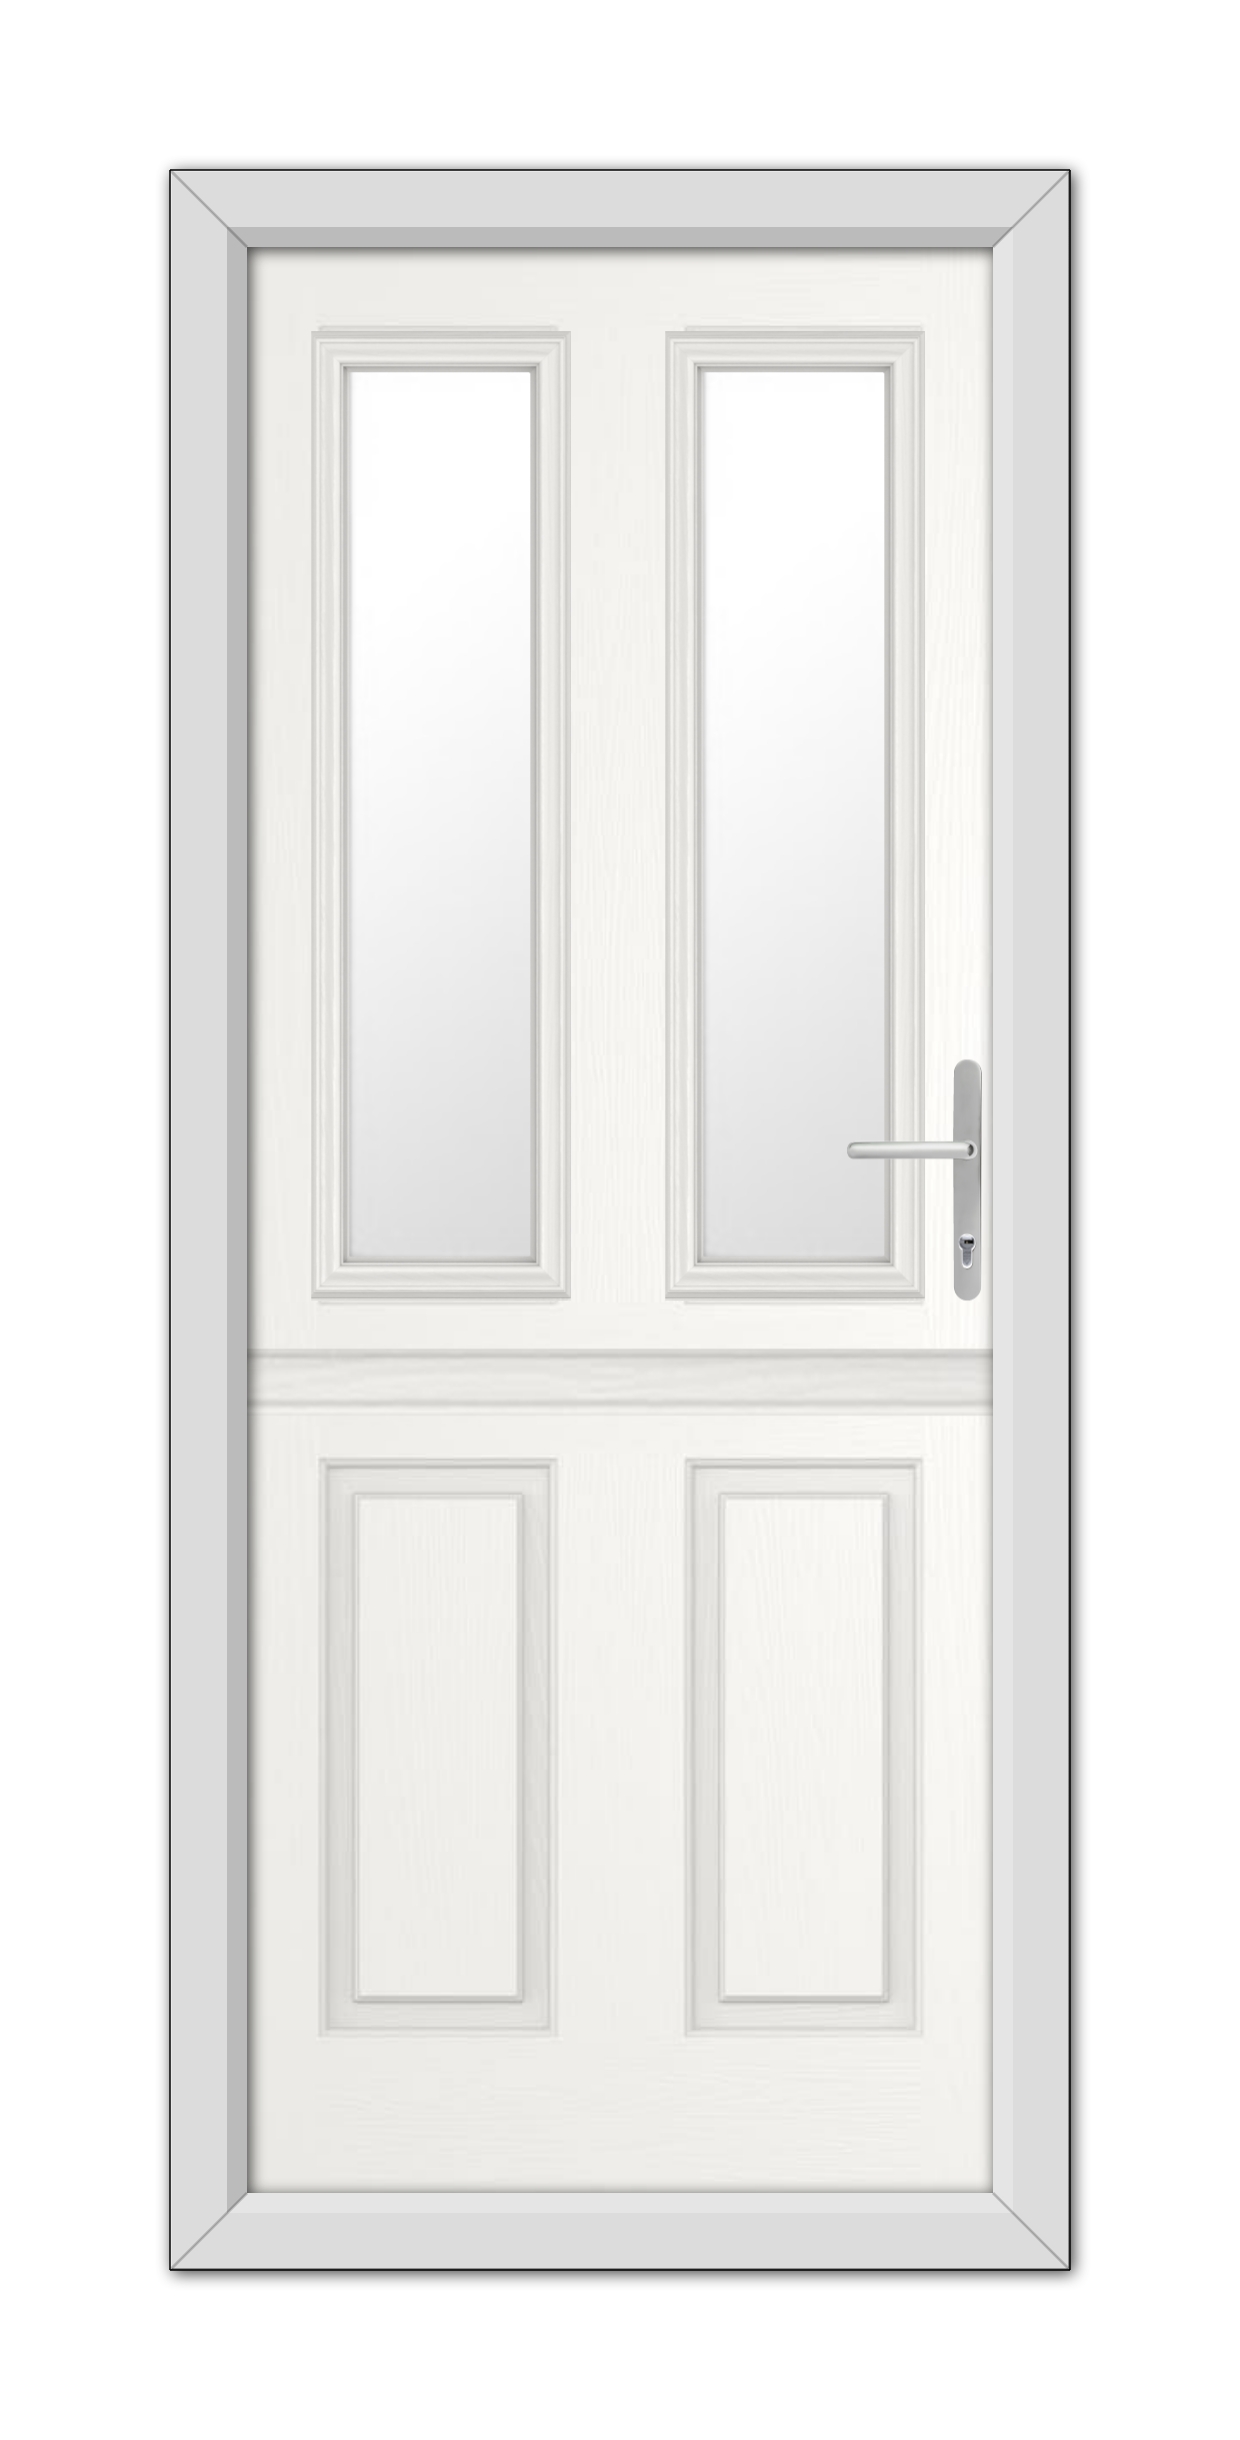 A White Whitmore Stable Composite Door 48mm Timber Core with a modern handle, framed in a simple white casing, indicating a closed entrance.